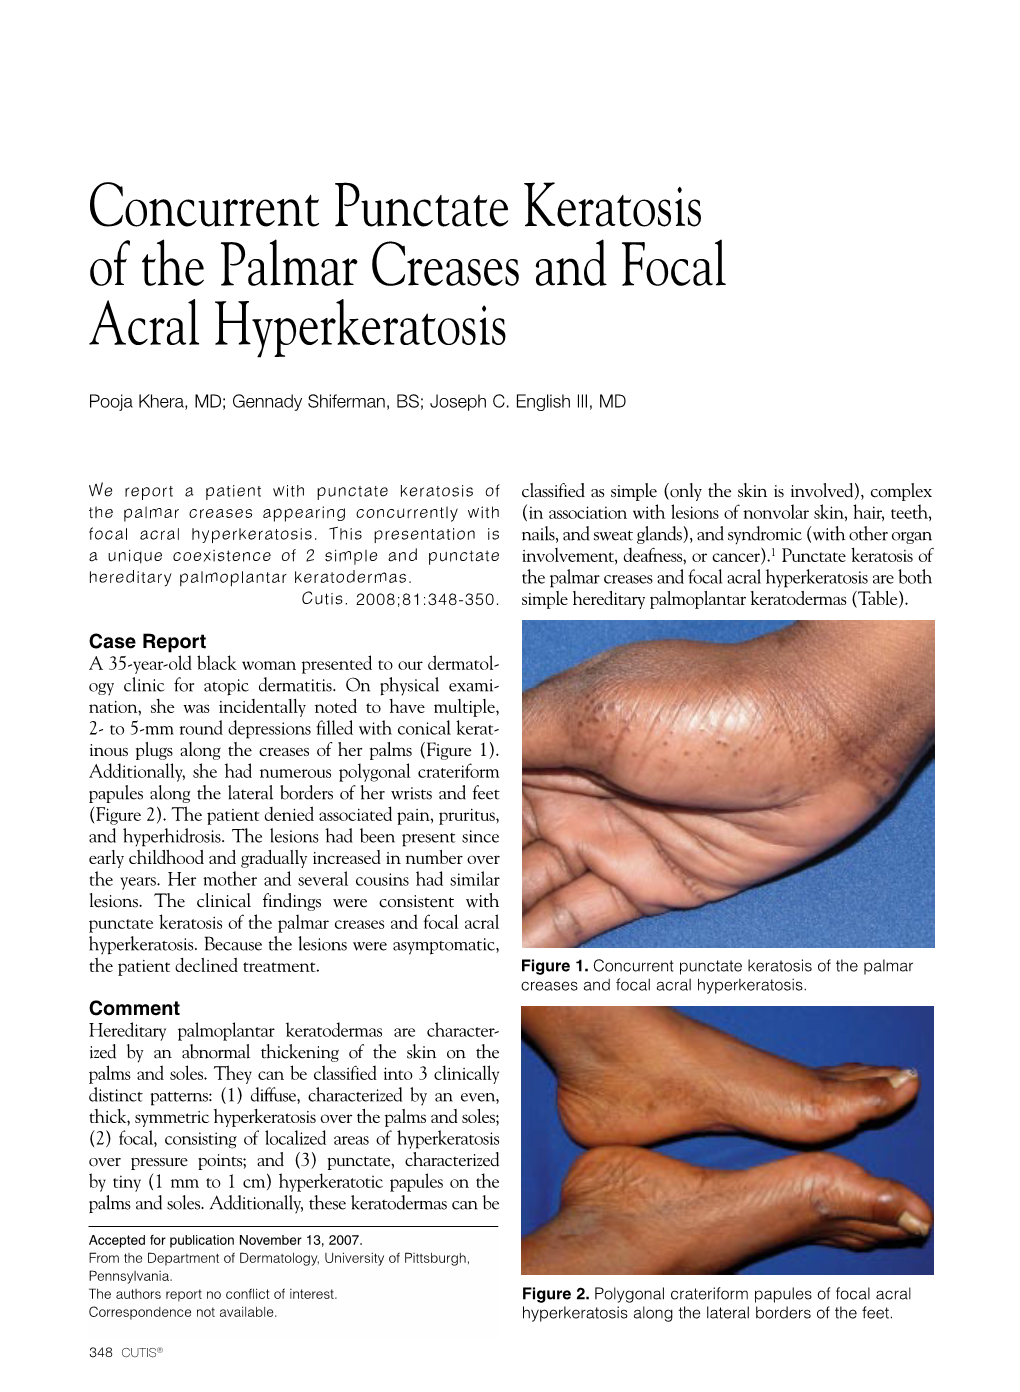 Concurrent Punctate Keratosis of the Palmar Creases and Focal Acral Hyperkeratosis